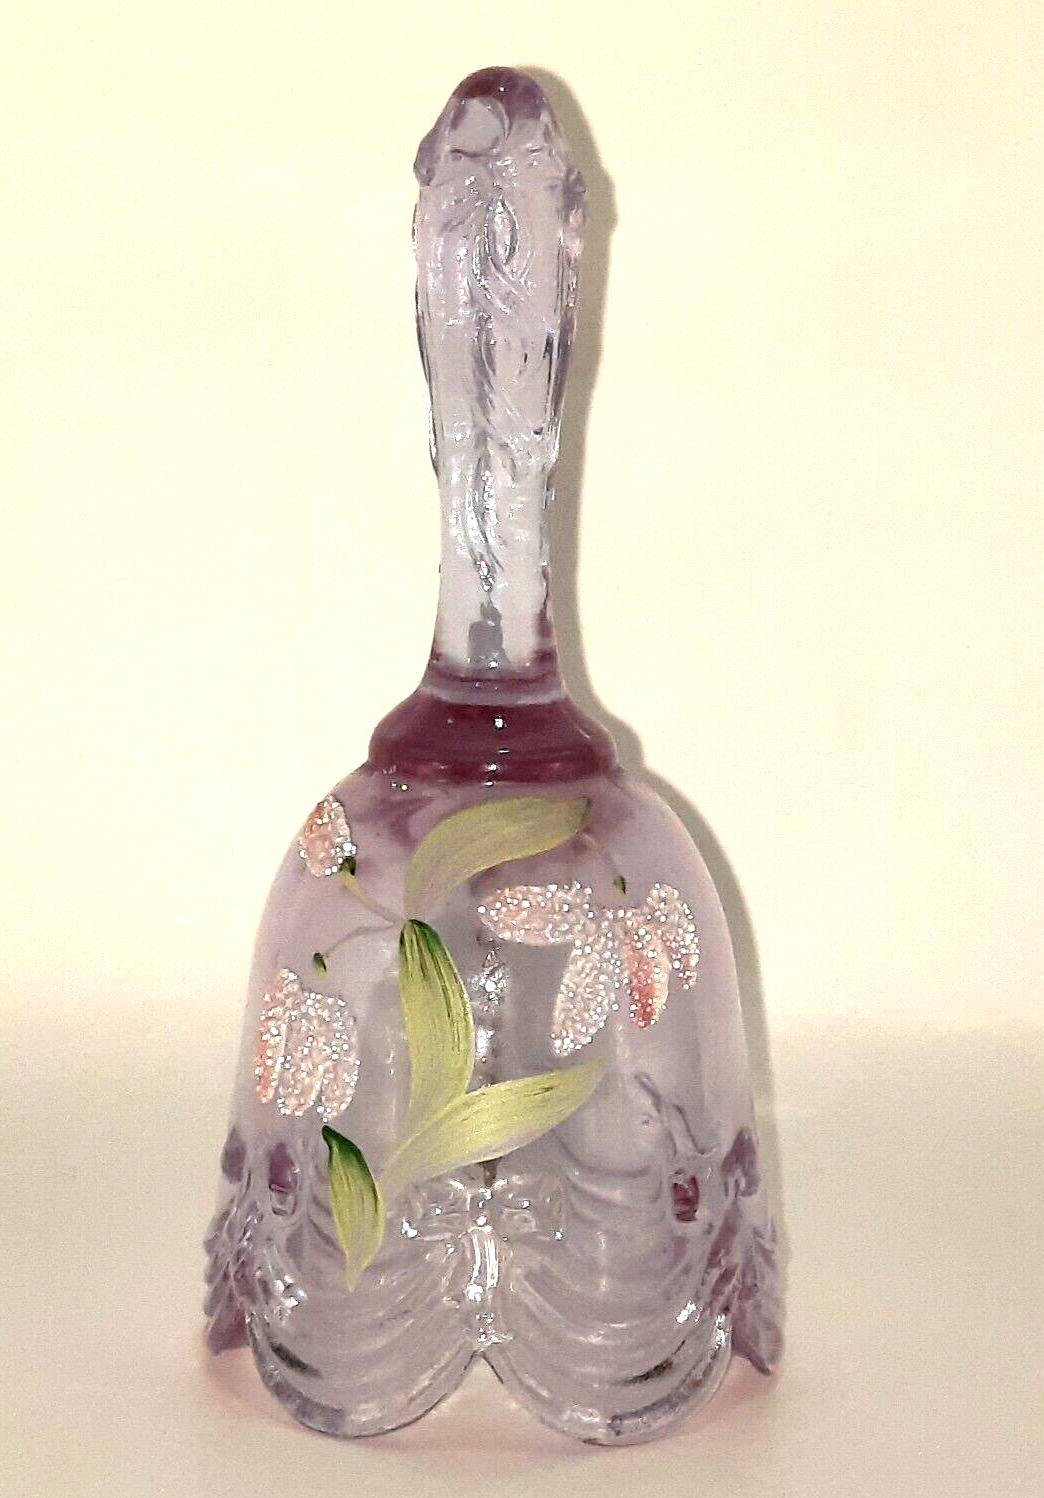 FENTON HAND PAINTED FLORAL PINK GLASS ART BELL SIGNED BY R. BLEVINS